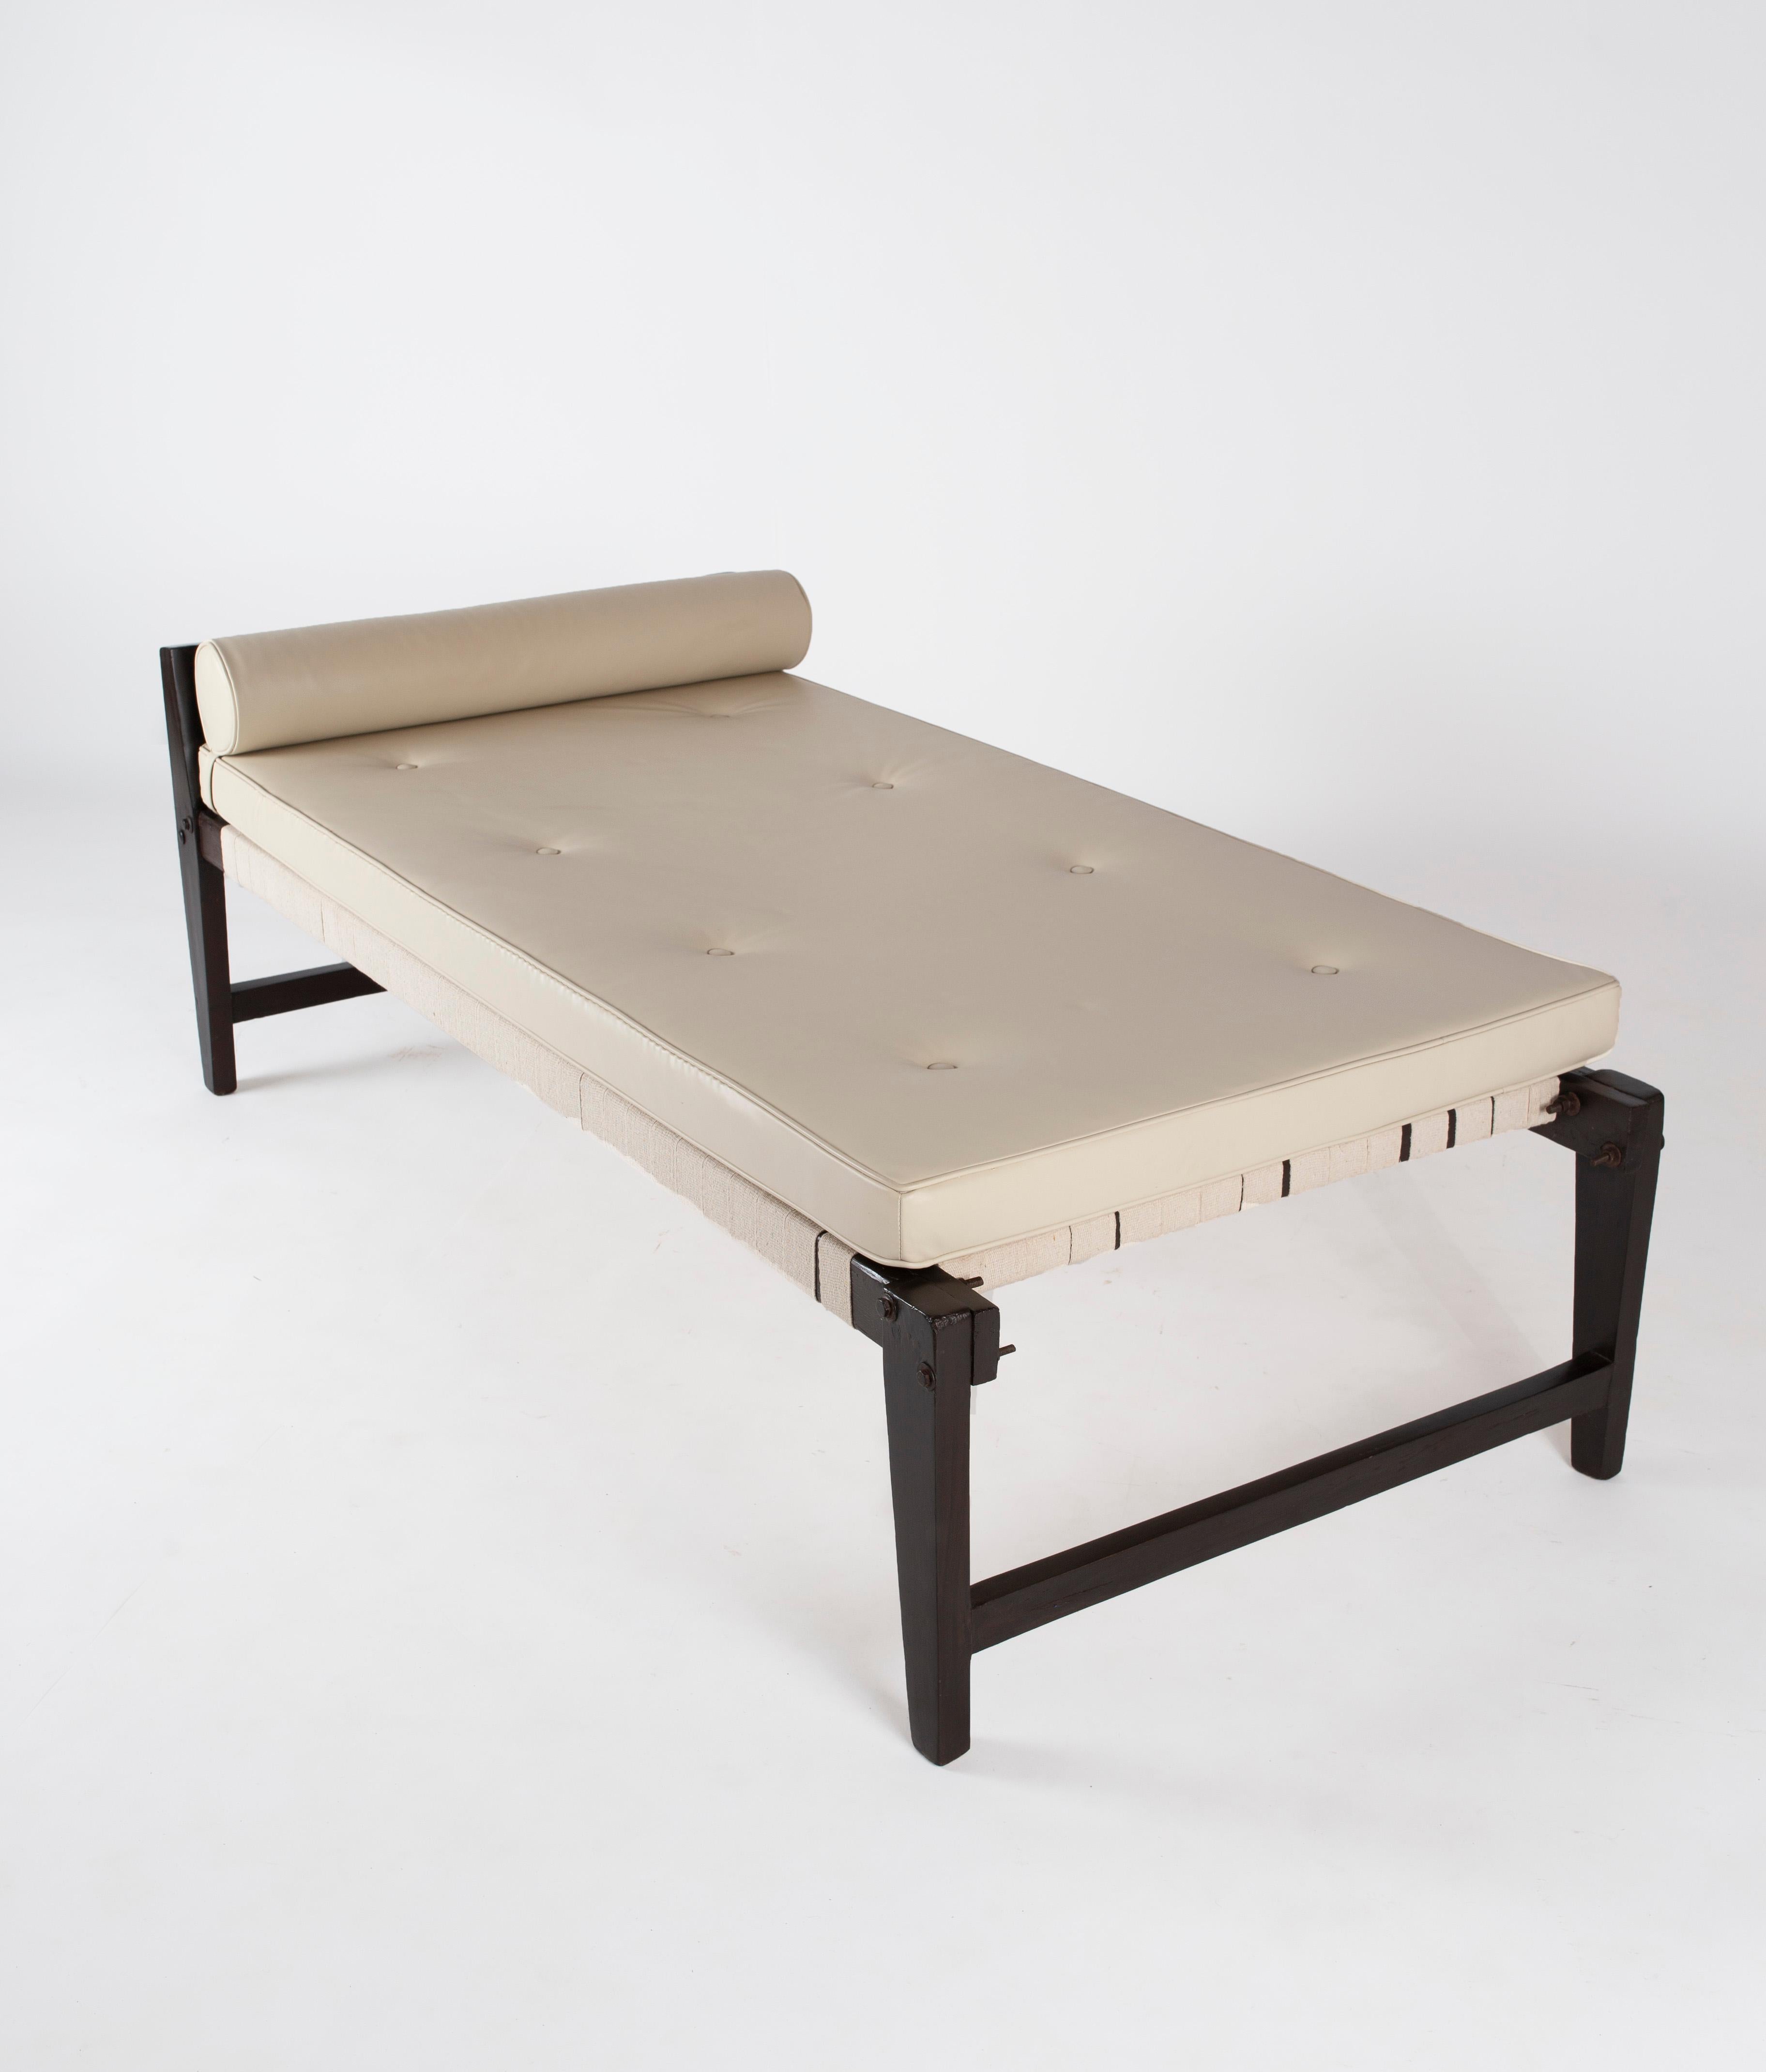 Mid-Century Modern Pierre Jeanneret De-Mountable Daybed with Headrest, Circa 1956 For Sale